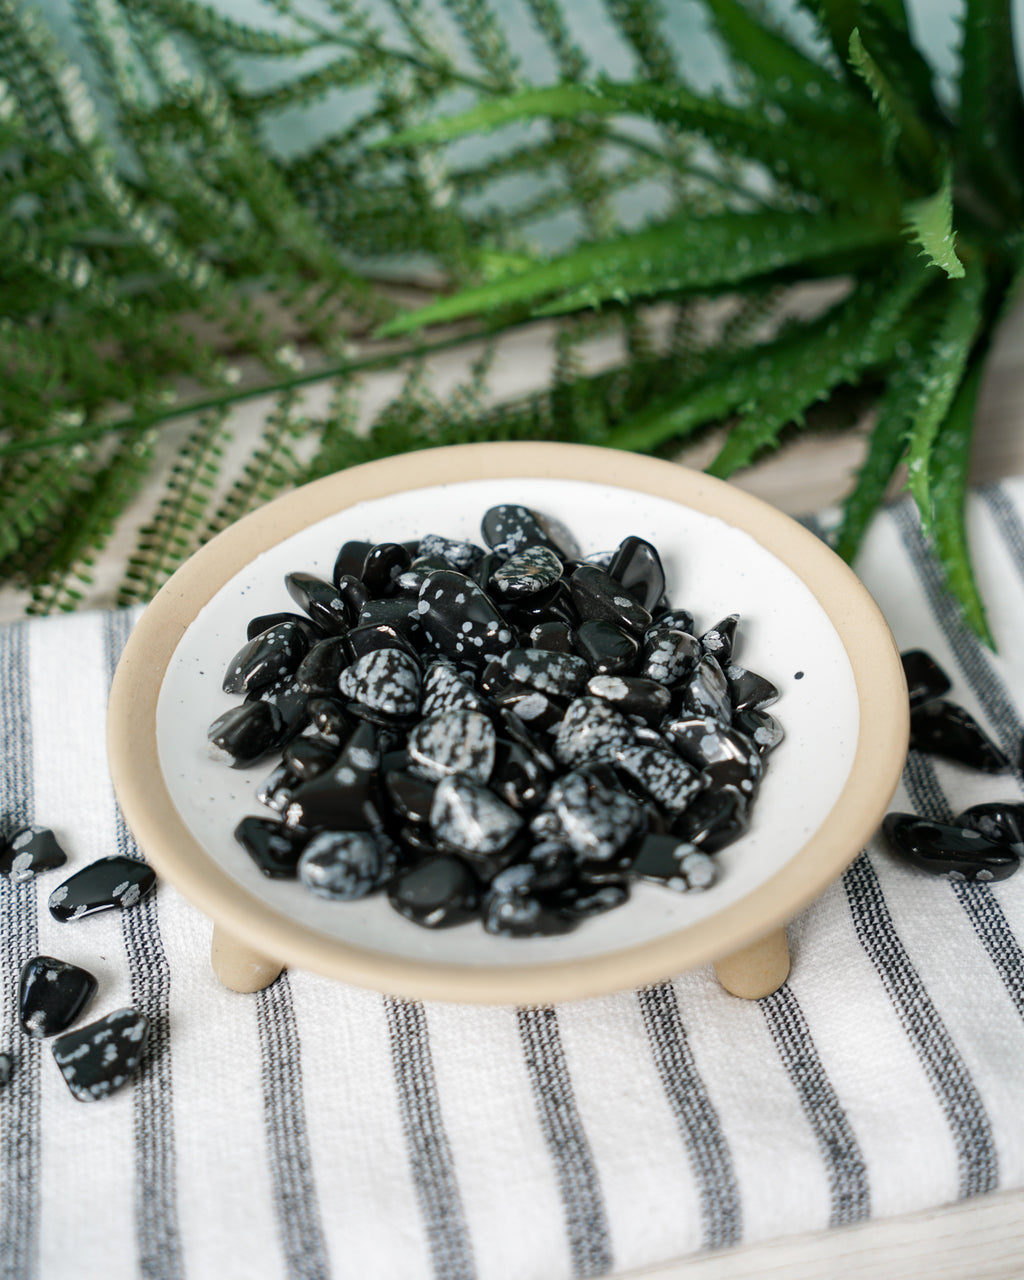 Tumbled Snowflake Obsidian for Balance & Courage